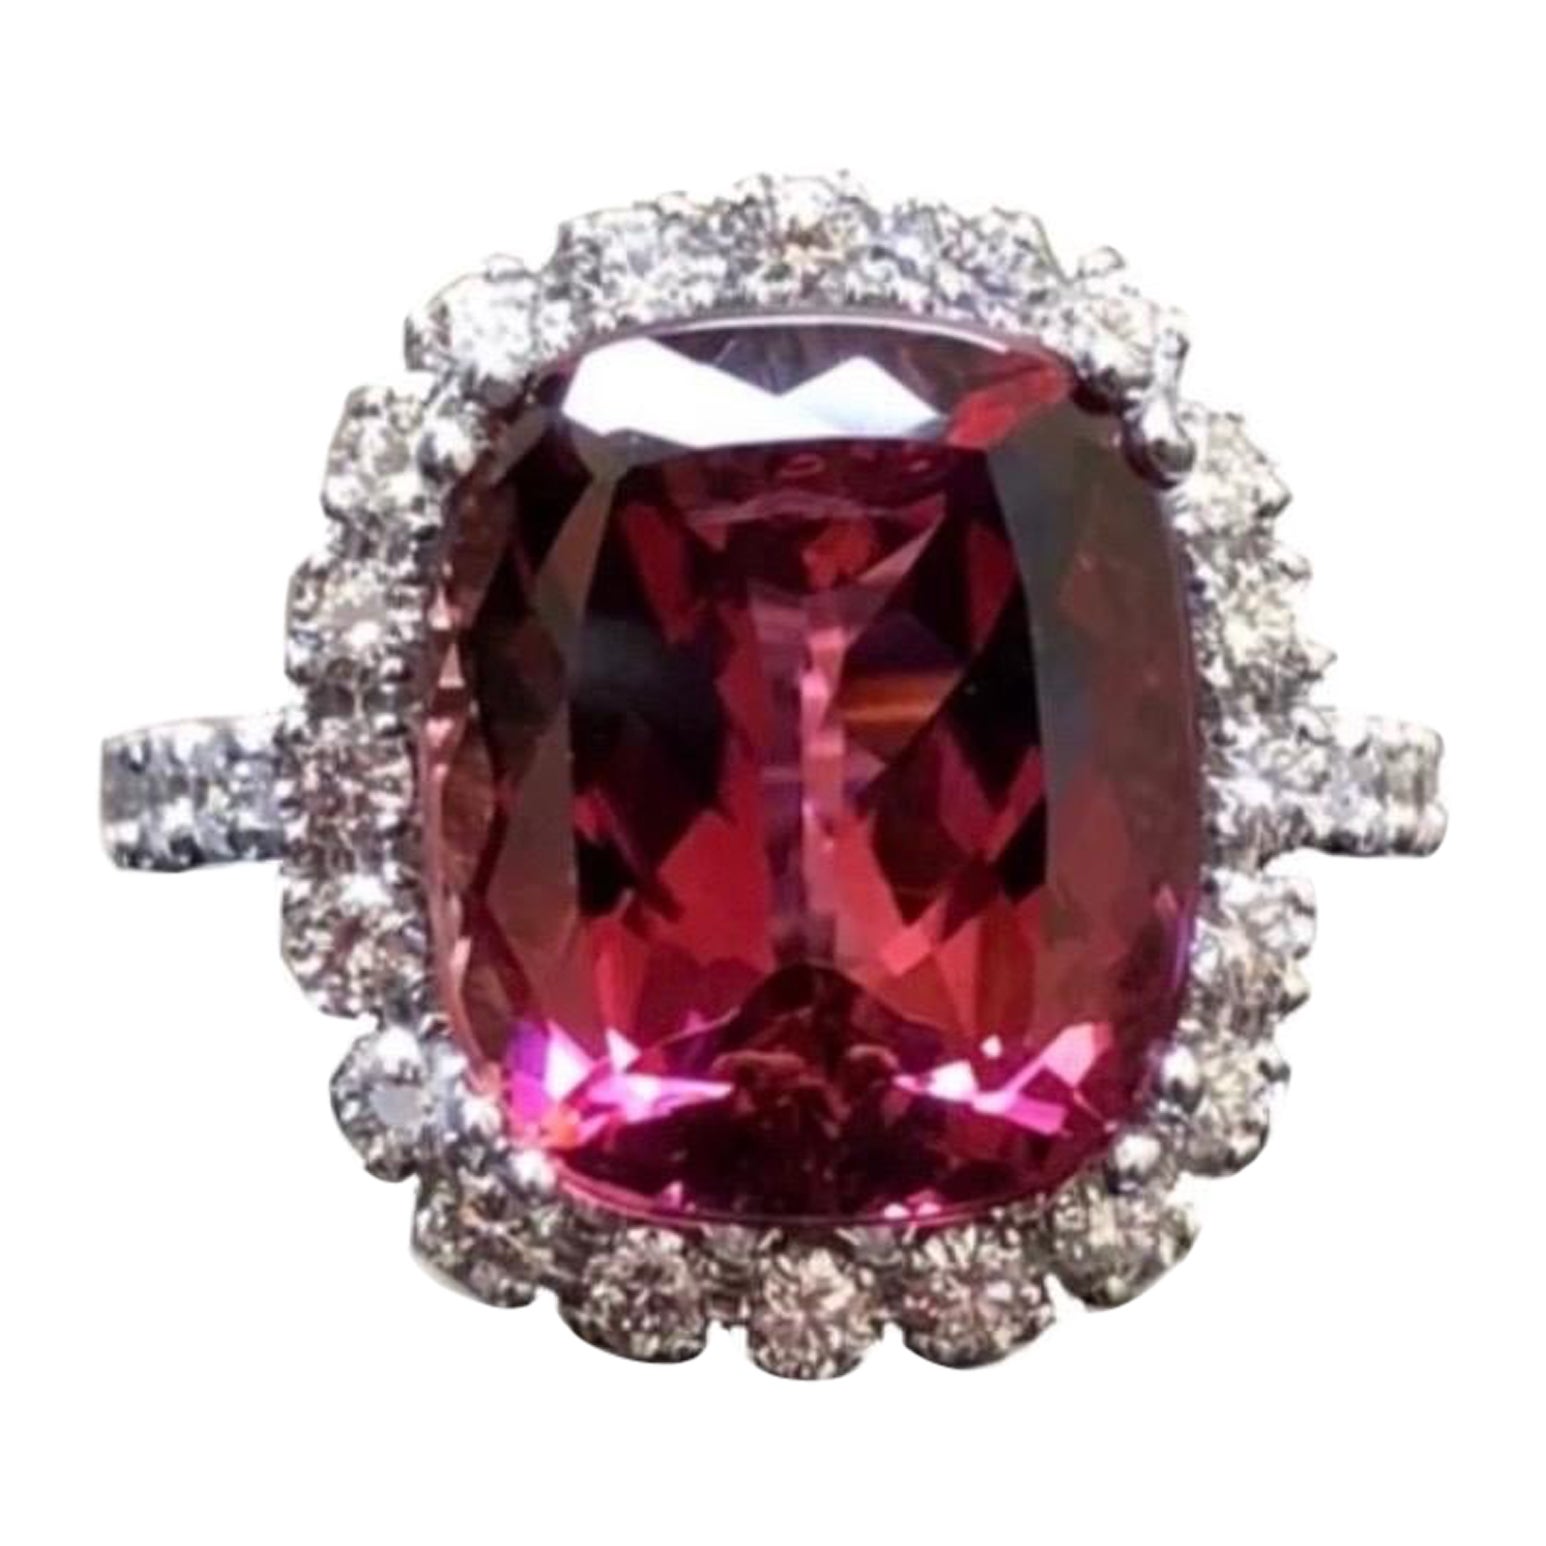 DeKara Designs Collection

Metal- 18K White Gold, .750.

Stones- Cushion Pinkish Red Tourmaline 8.40 Carats, 32 Round Diamonds, F-G Color VS1-VS2 Clarity, 1.20 Carats.

Size- Ring is a 6 1/2. FREE SIZING!!!!

A Breathtaking Luxurious 18K White Gold